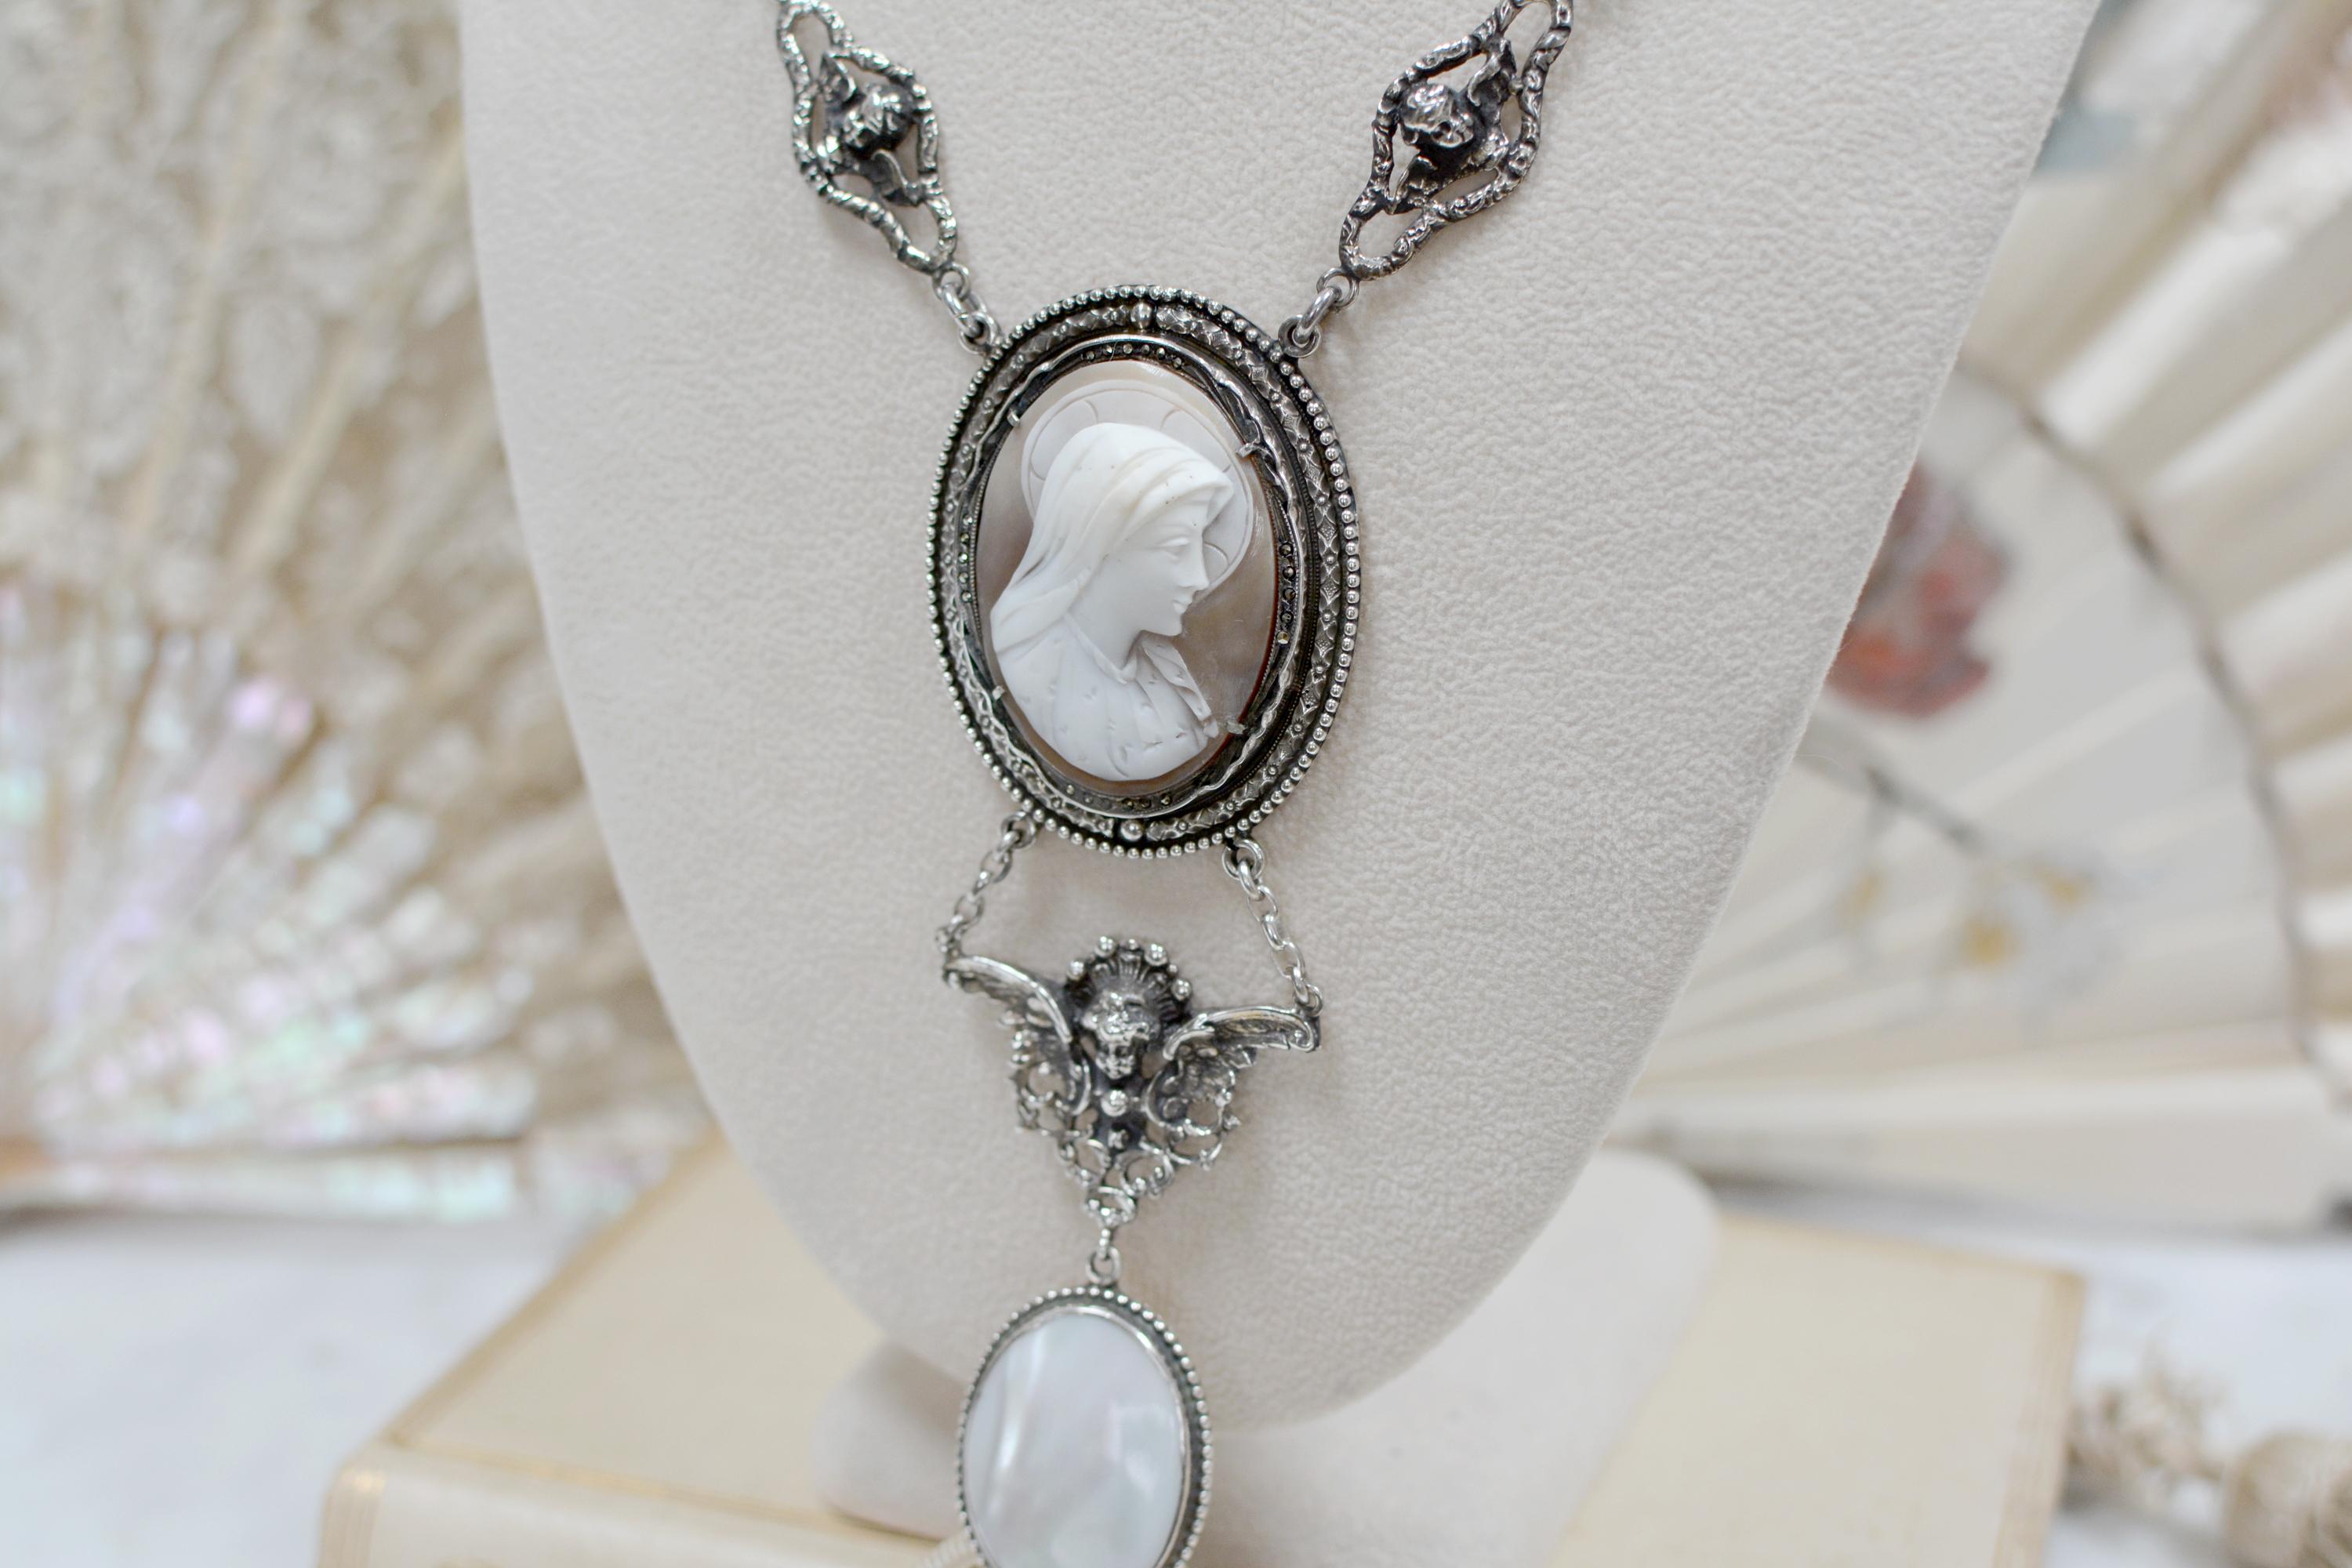 Jill Garber Antique Saint Mary Cameo Angels Drop Necklace with Mother of Pearl In Excellent Condition For Sale In Saginaw, MI